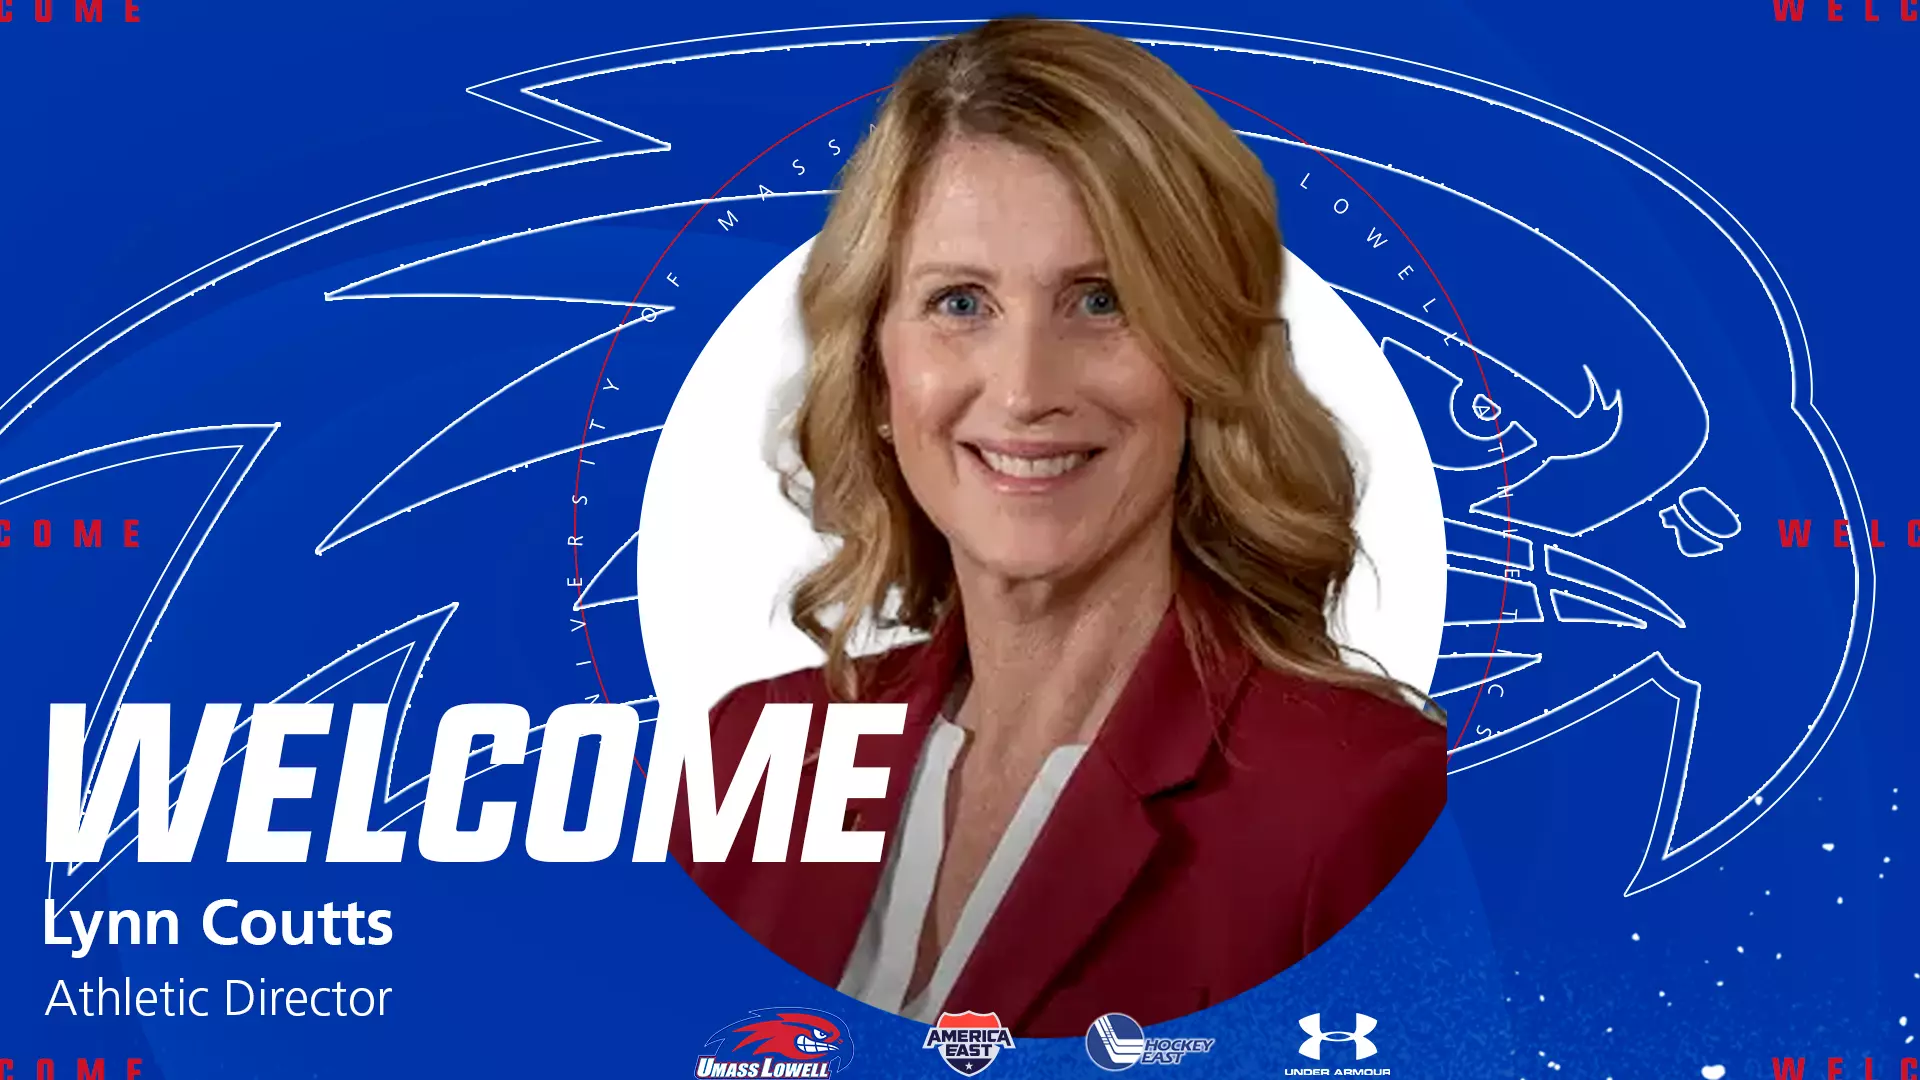 UMass Lowell Names Lynn Coutts Next Athletic Director